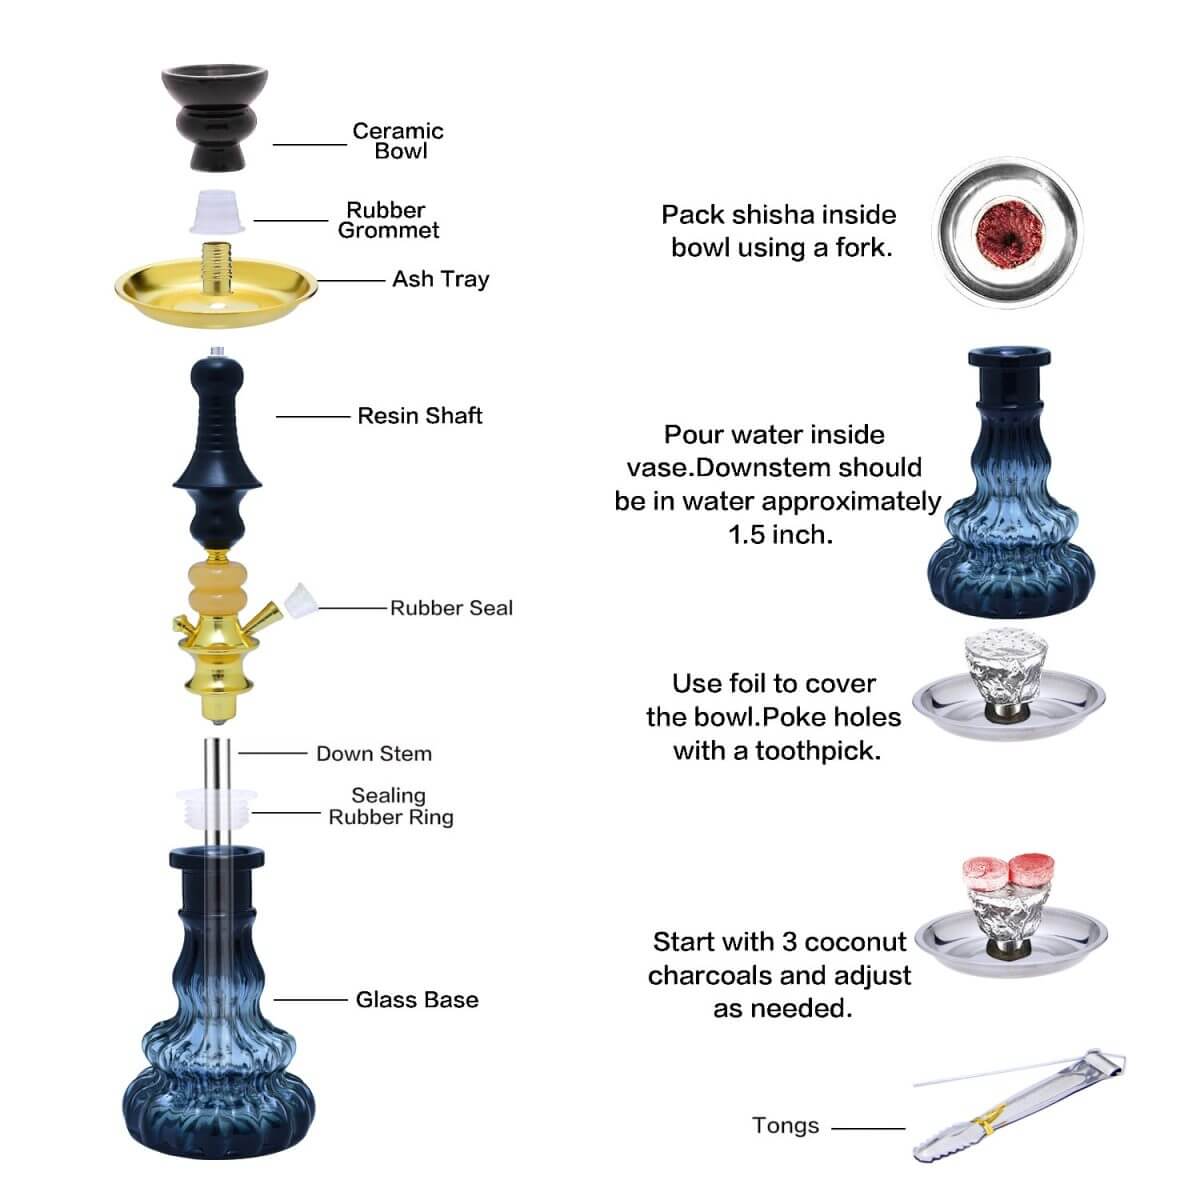 Wholesale hookah pipes and accessories